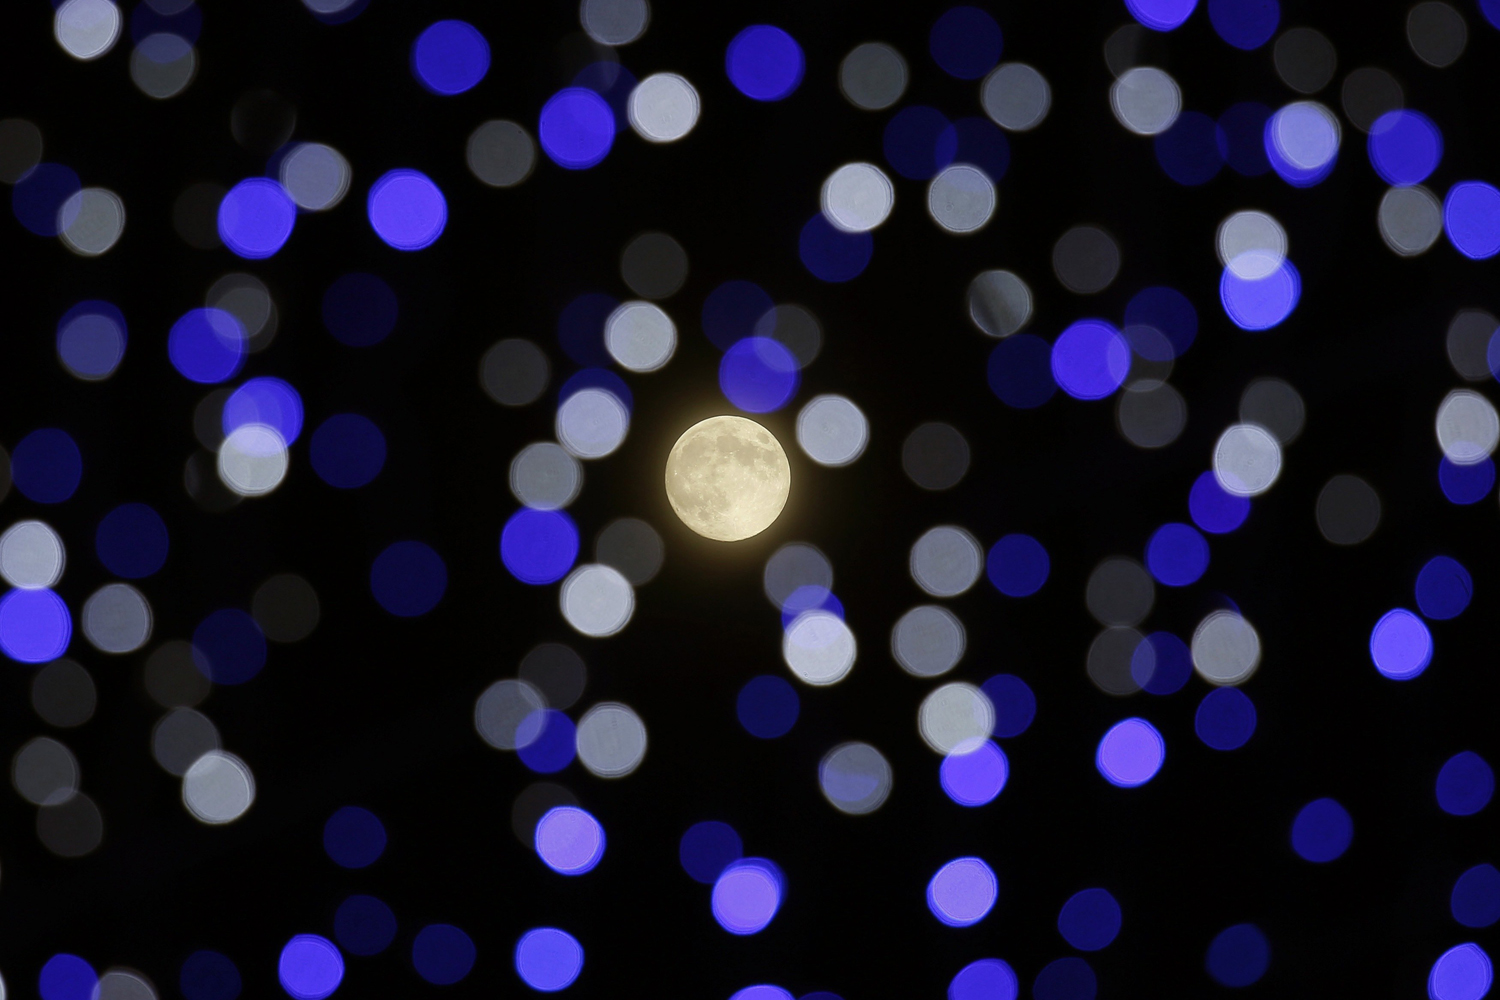 Sept. 8, 2014. The moon shines in between lighting installation during Mid-Autumn or Lantern Festival at Hong Kong's Victoria Park. Chinese worldwide celebrate the festival on the 15th day of the eighth month of the Lunar calendar.